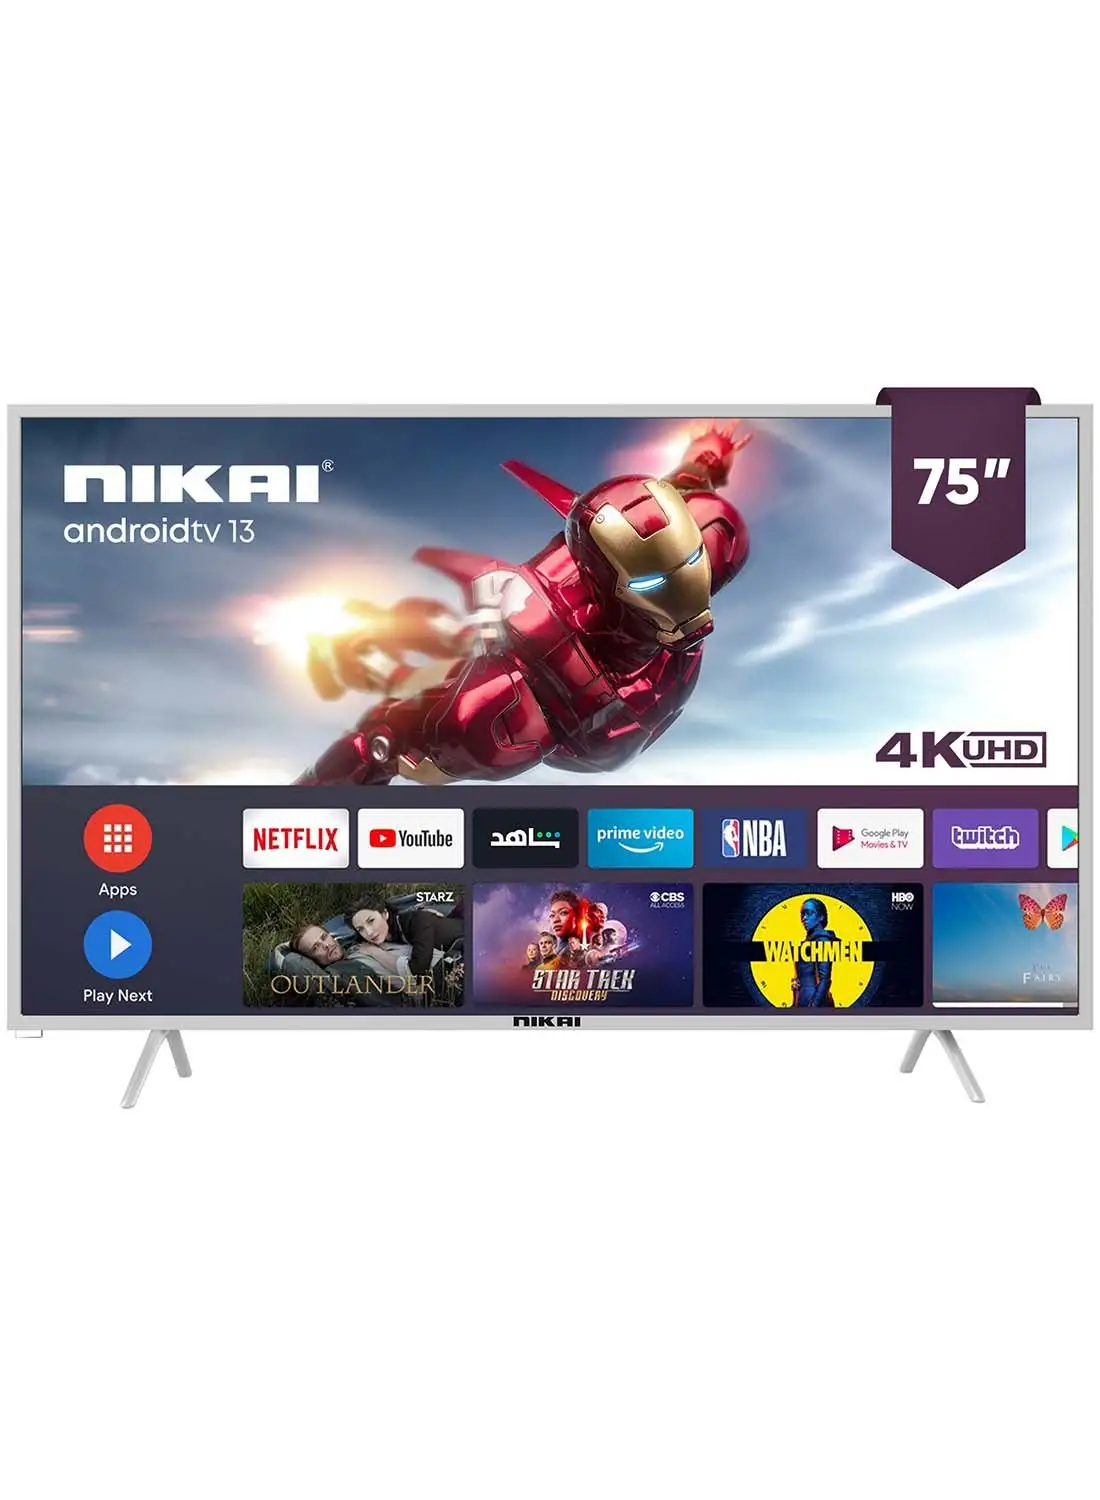 NIKAI 75 Inch Smart LED TV, Frameless Design, Built-In Wi-Fi, Smart Apps Shahid, YouTube, Netflix, Amazon, HDMI And USB Connectivity, Quad-Core, 1GB RAM, 8 GB Memory, Auto Power Off UHD75SLEDT Silver